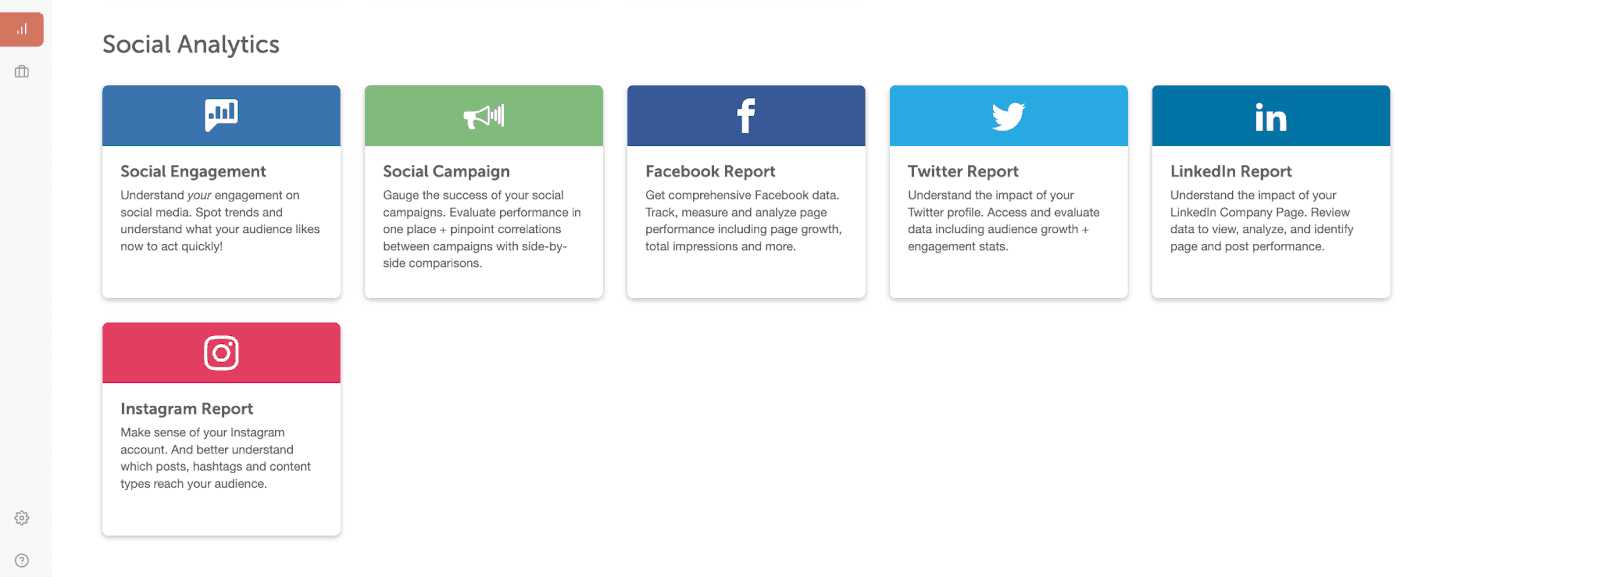 CoSchedule's Social Analytics page